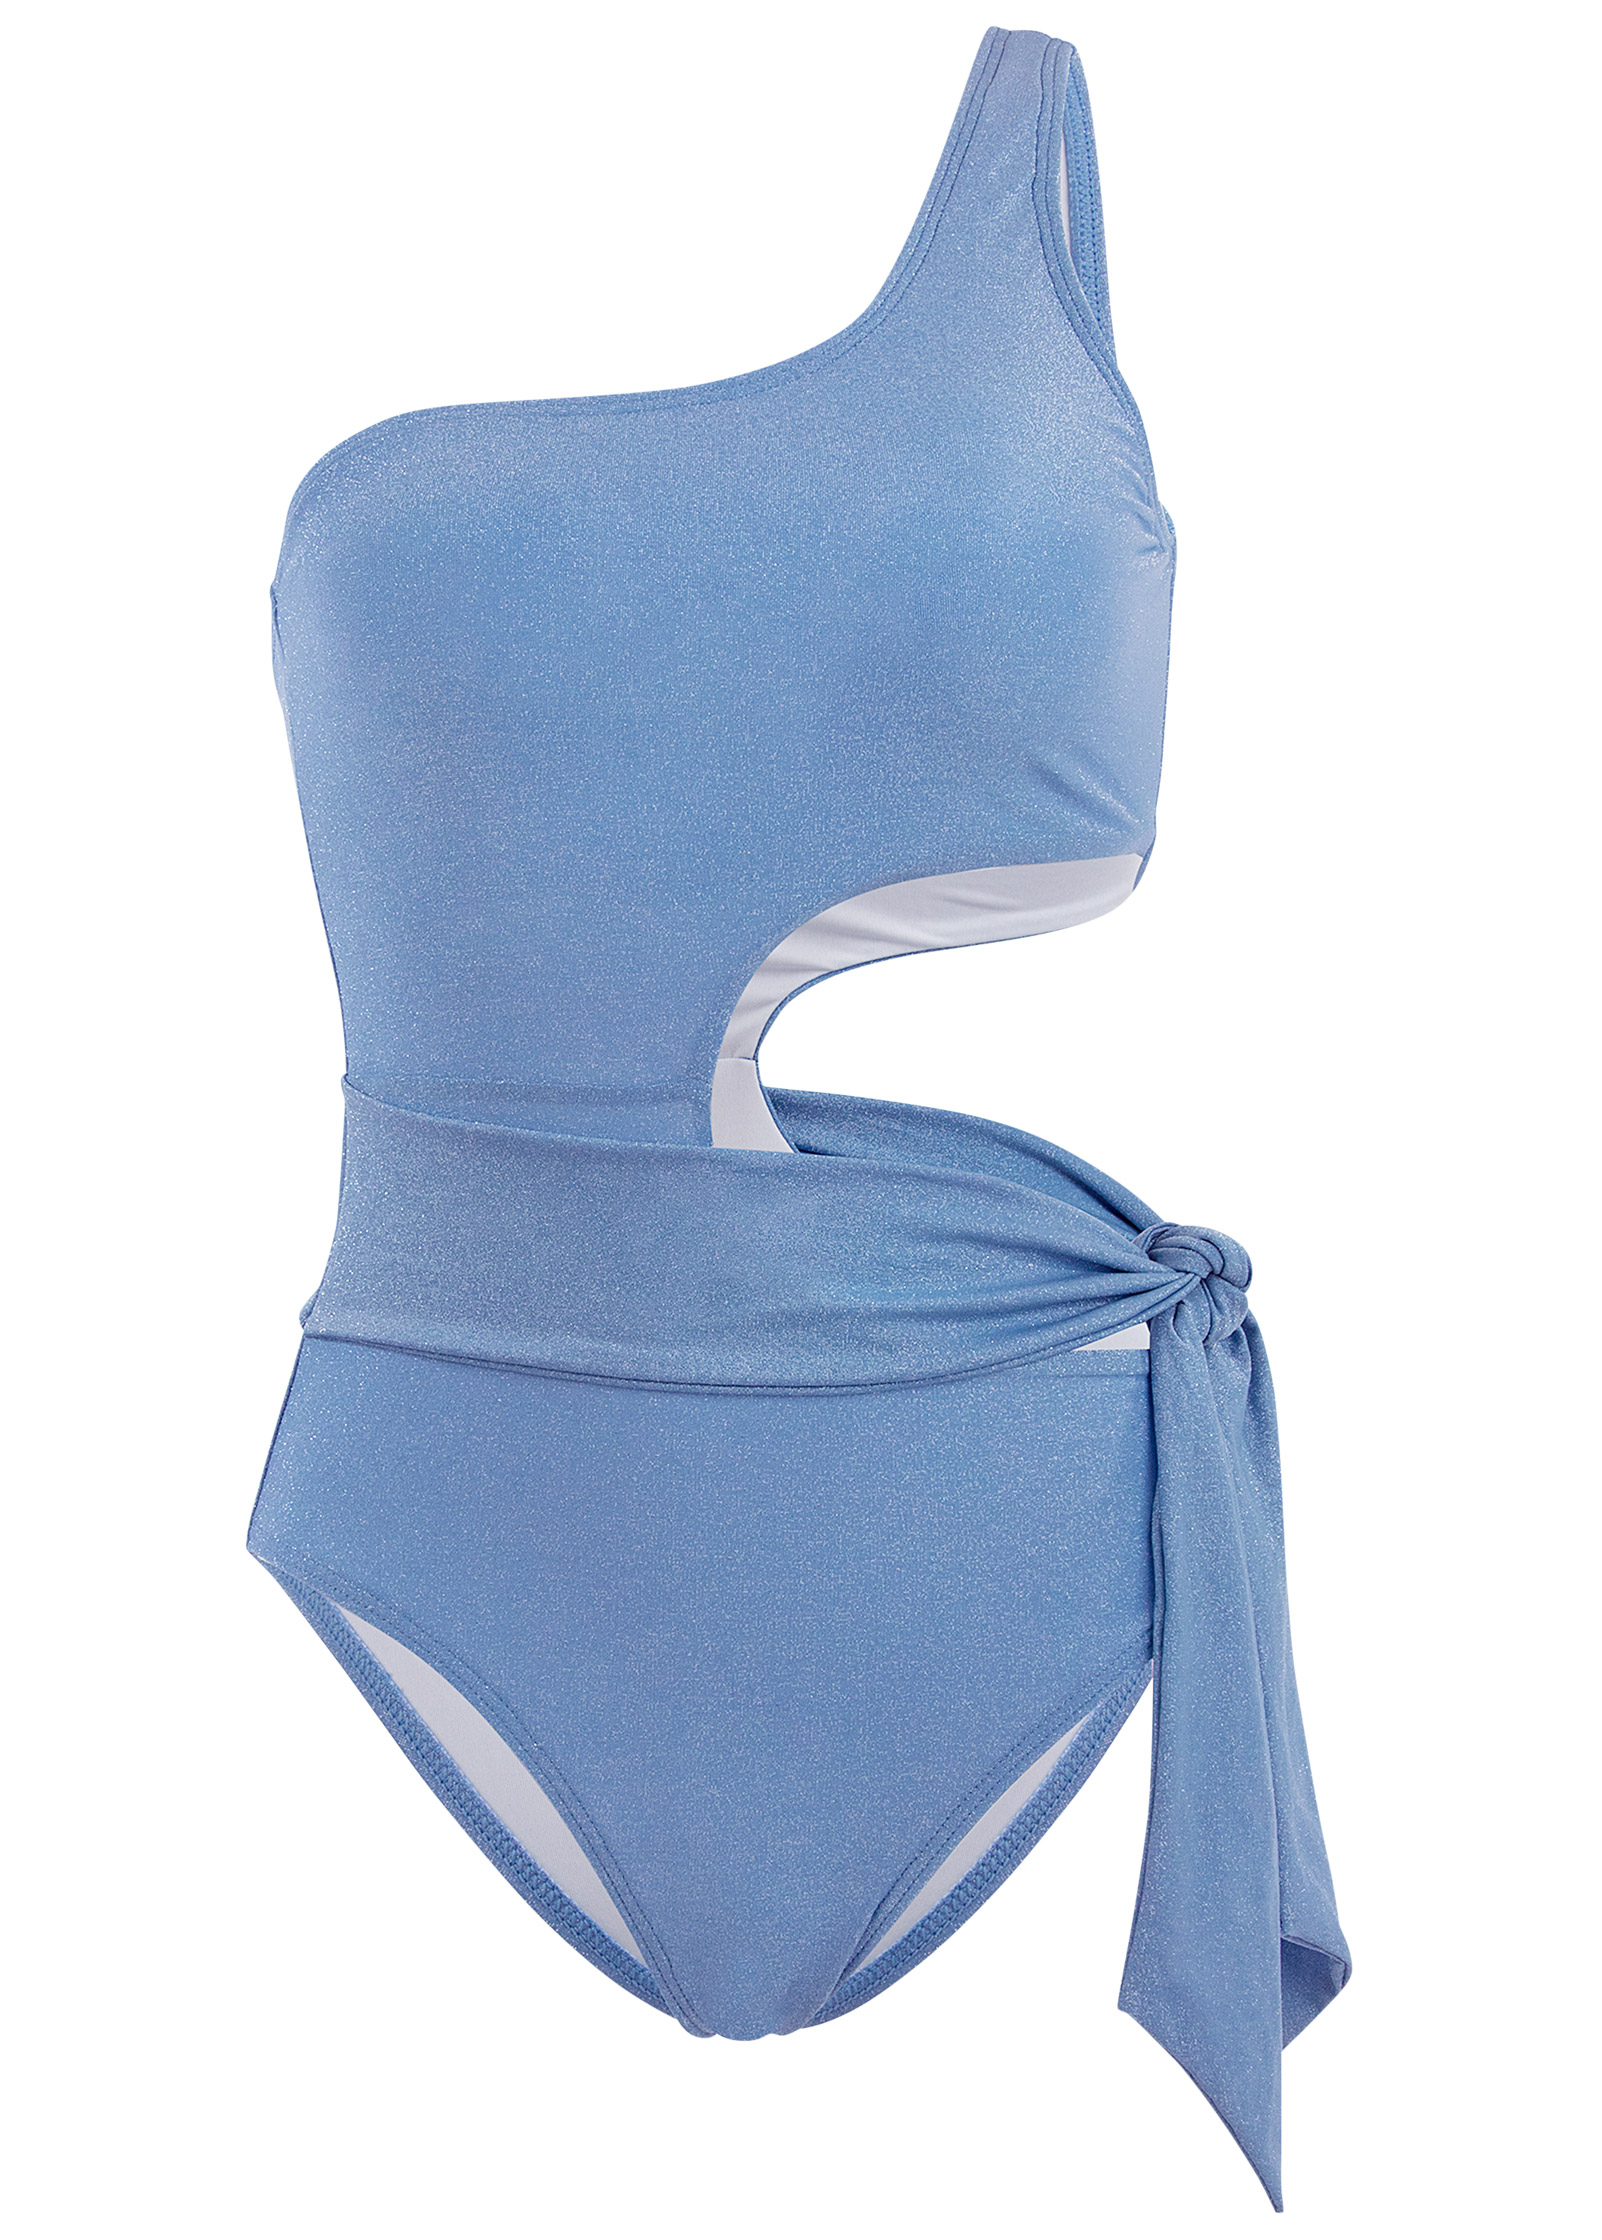 Shimmer One-Piece Swimsuit in Periwinkle Shine | VENUS